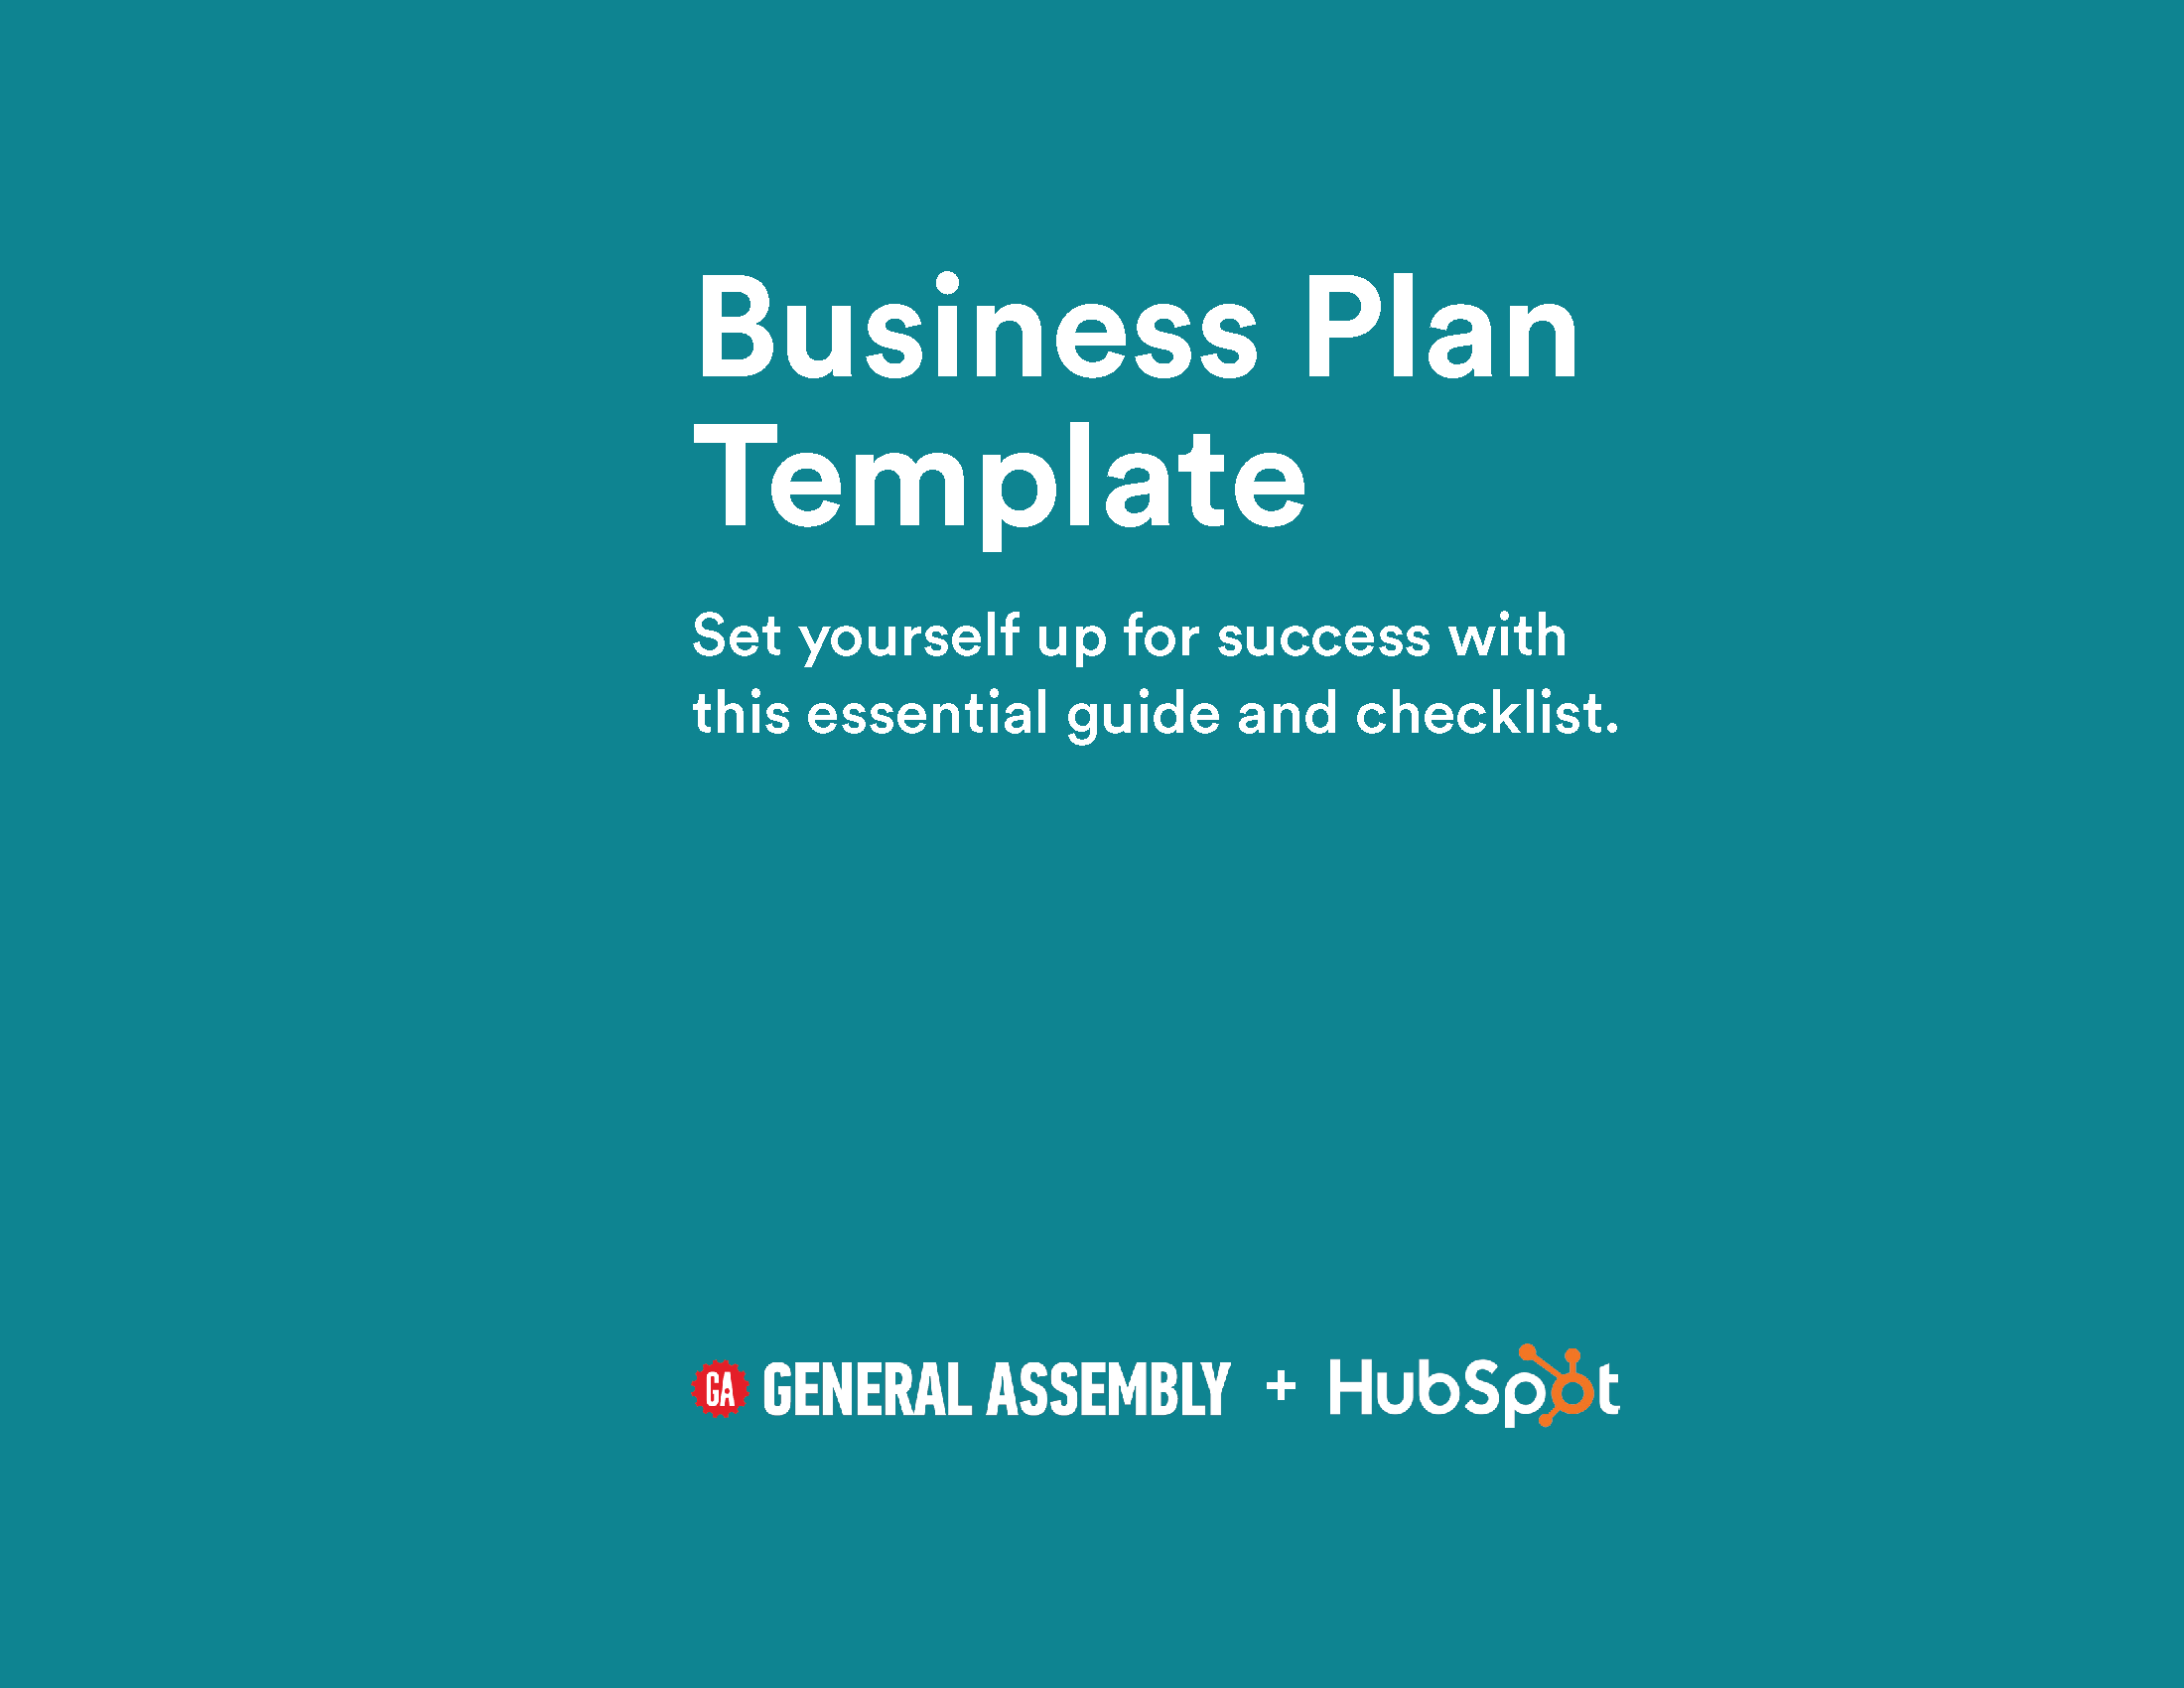 business plan to purchase existing business